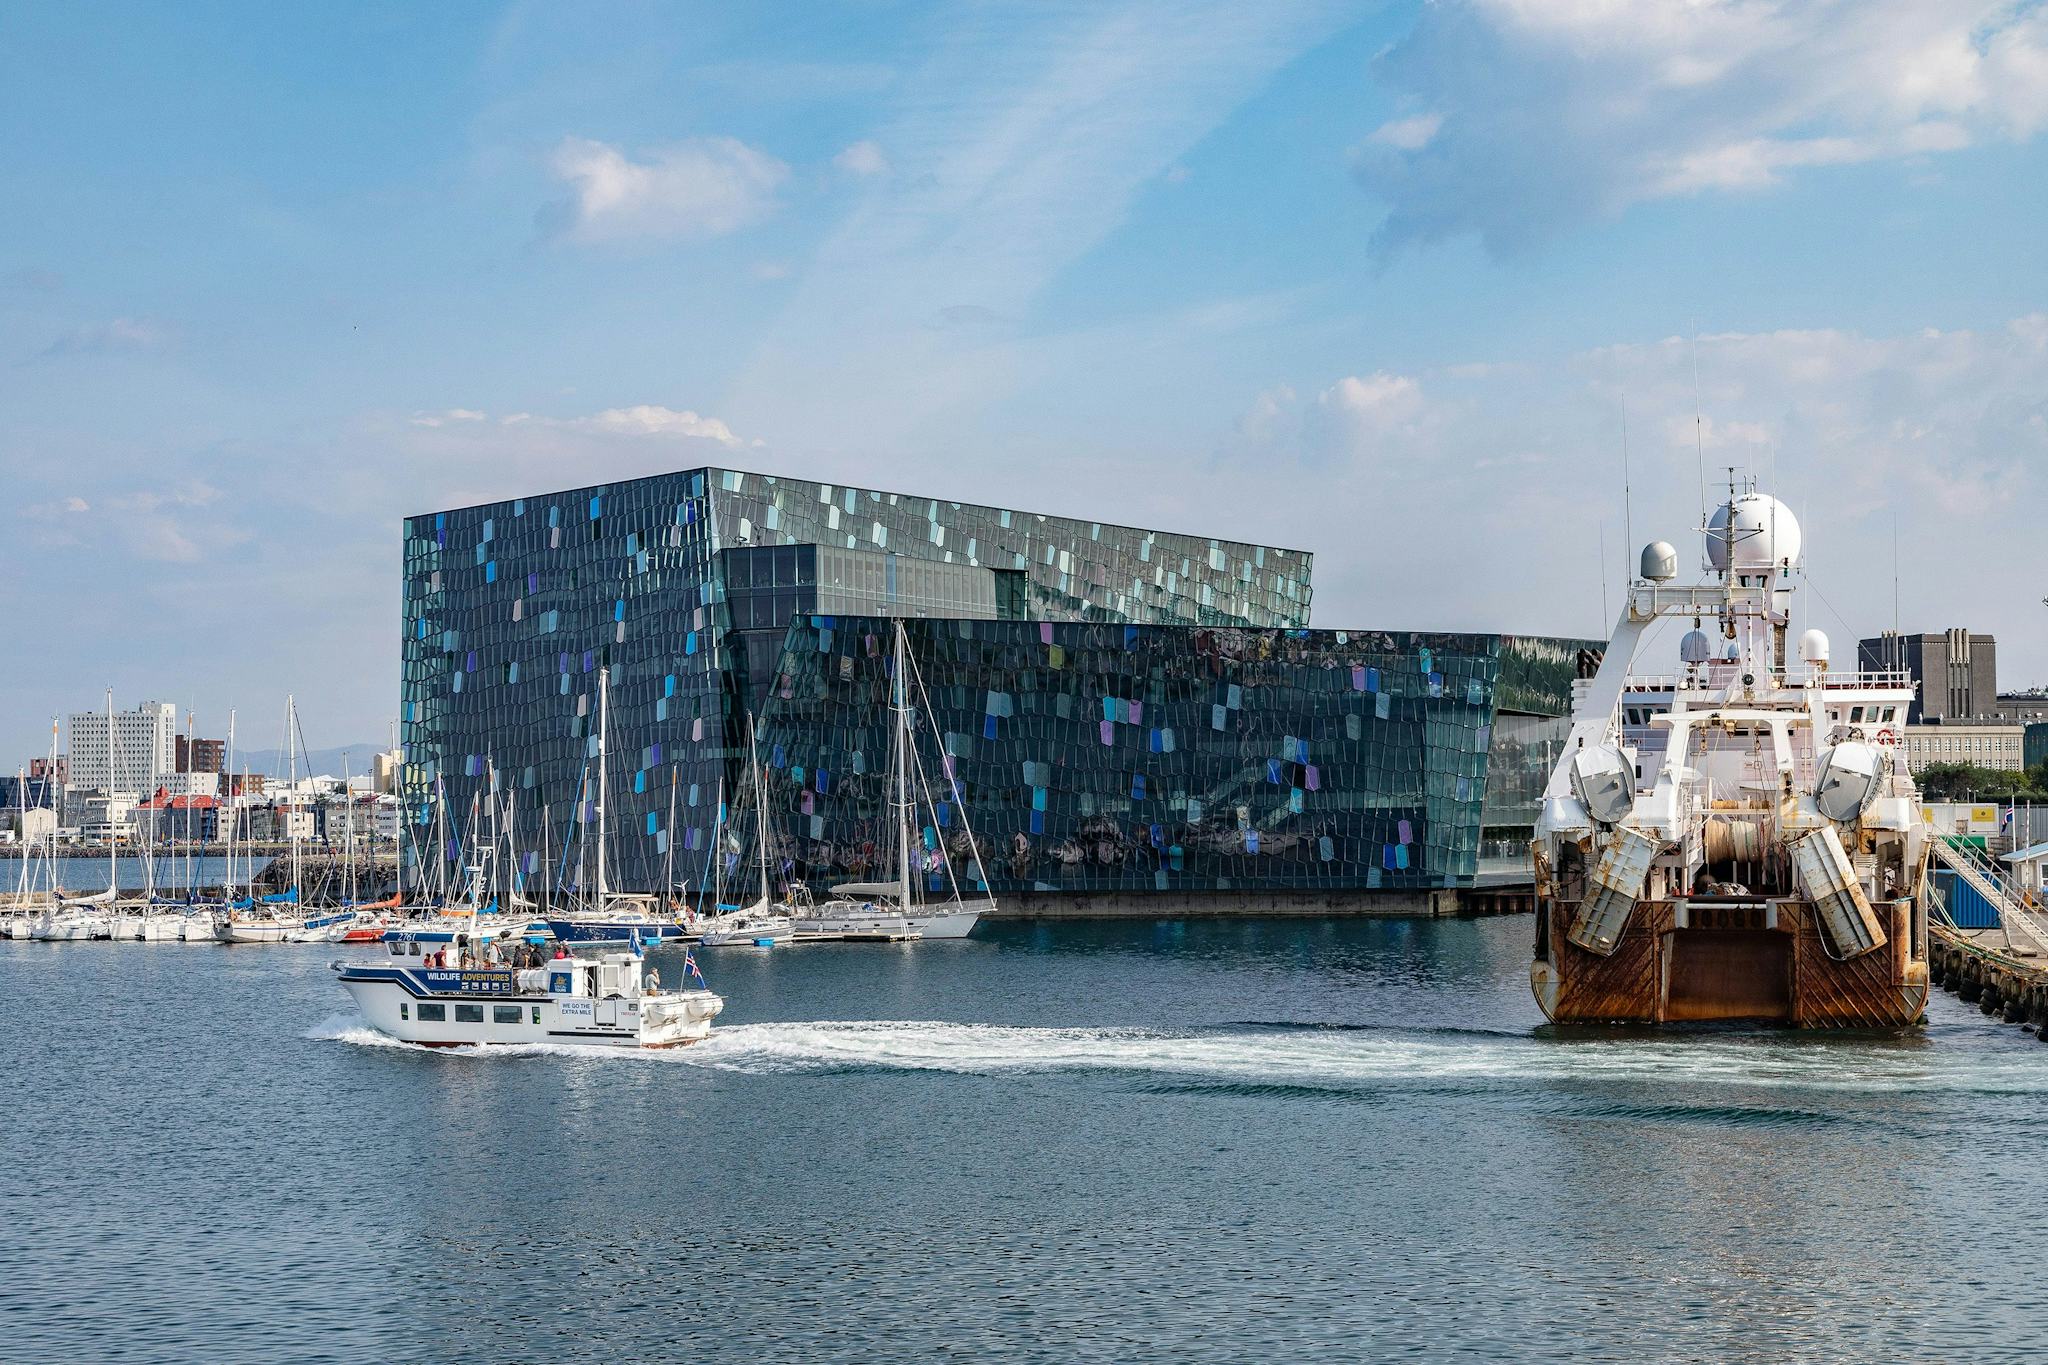 A modern building with unique patterned facade by the waterfront alongside a variety of boats including a yacht and a large ship